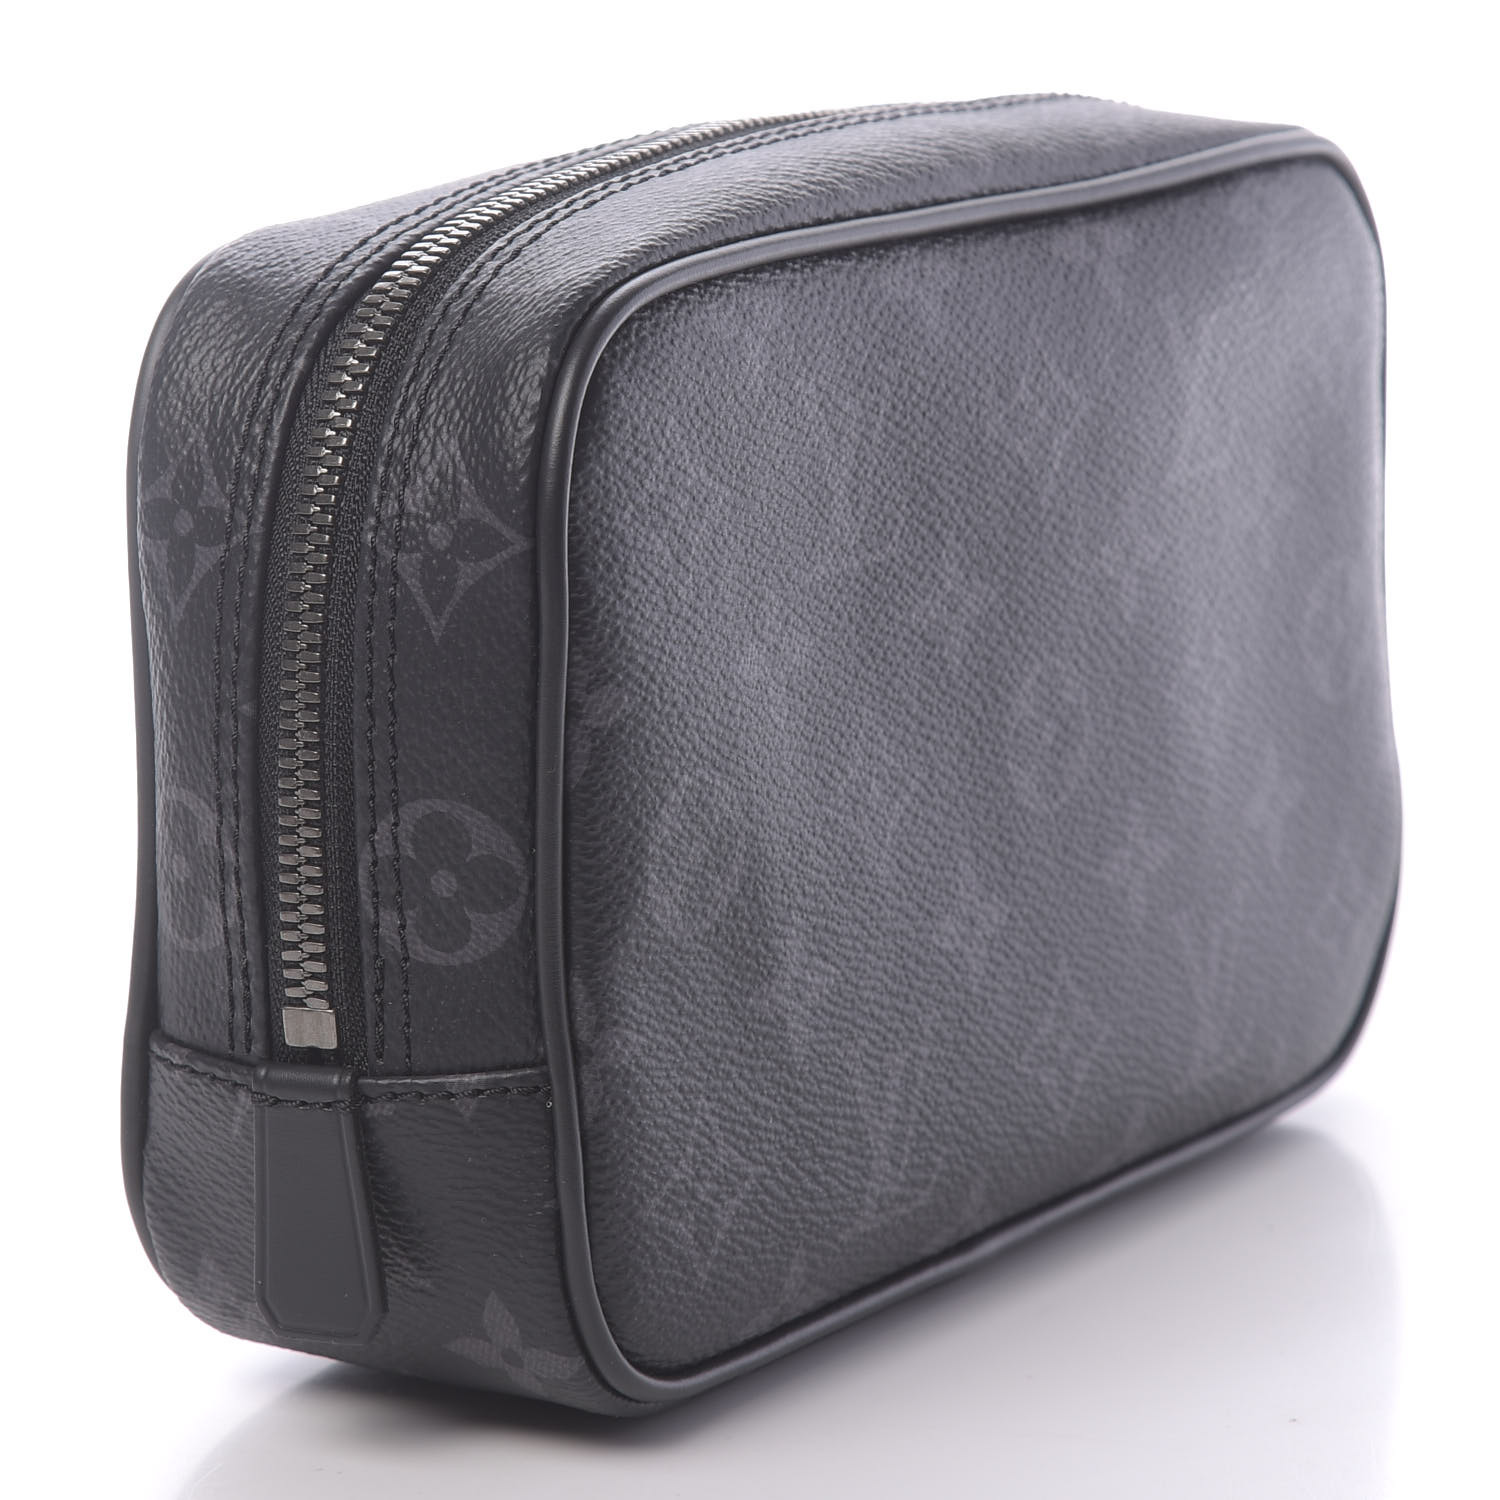 Toilet Pouch GM Monogram Eclipse in MEN's TRAVEL & LUGGAGE